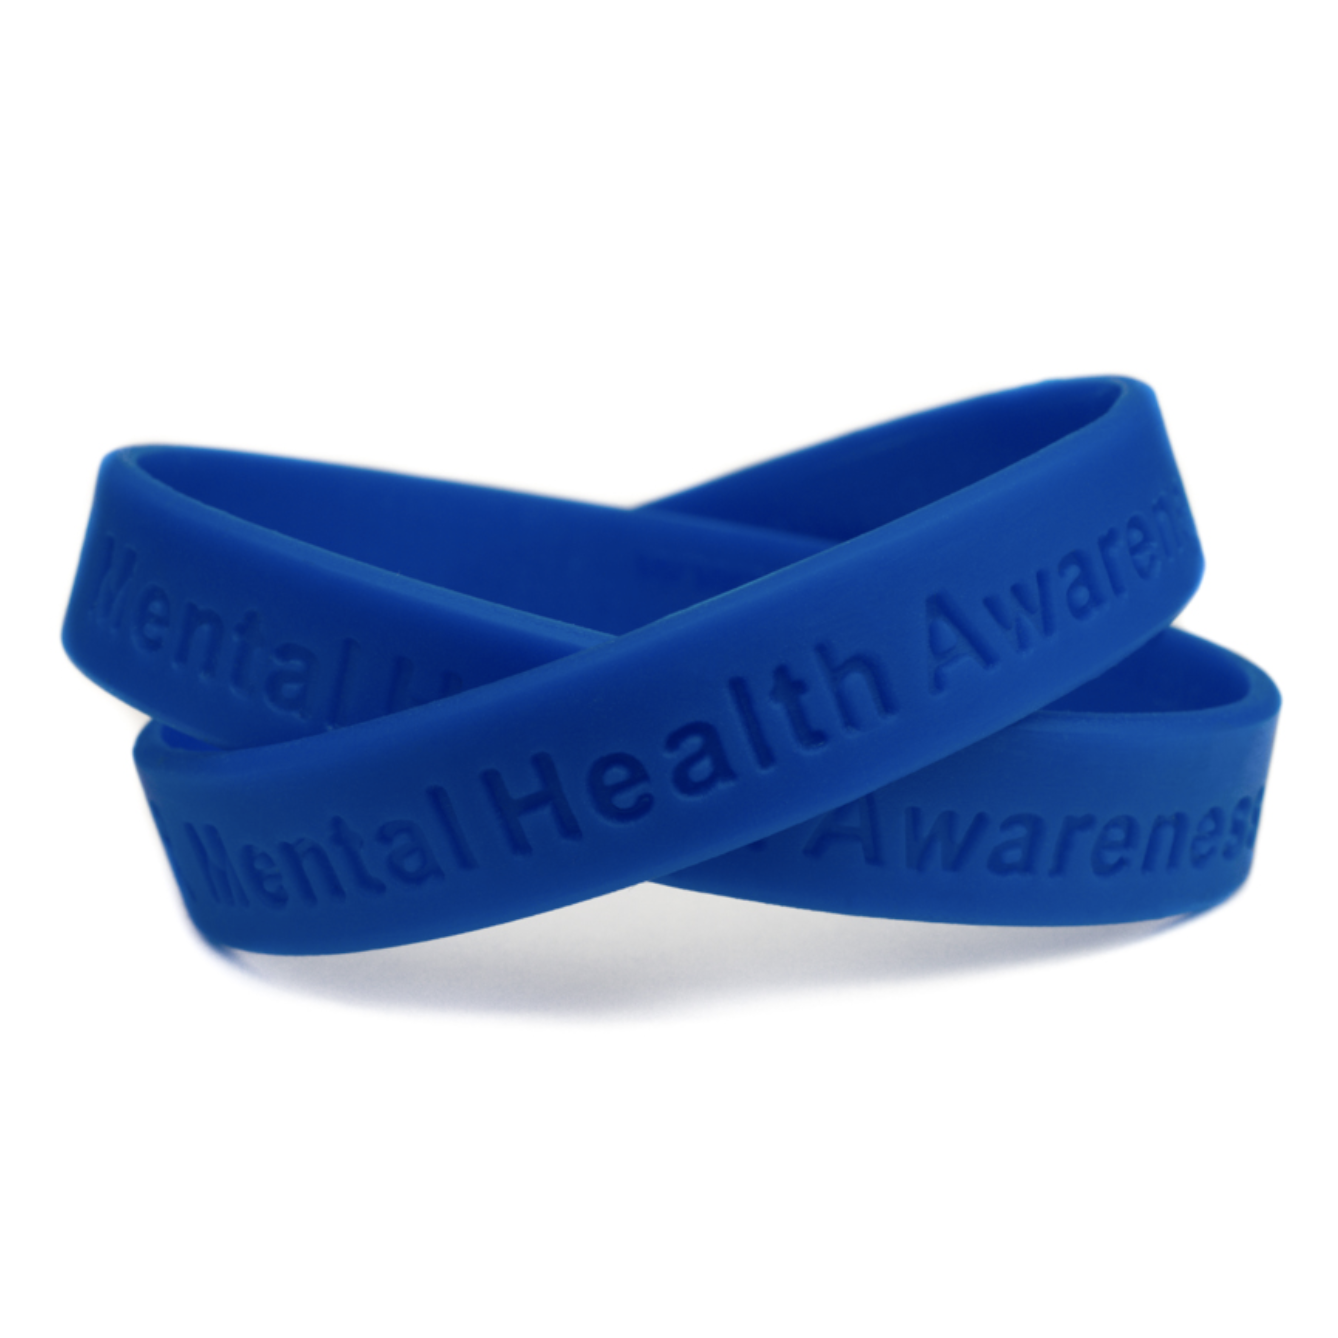 bully free - way to be wristband